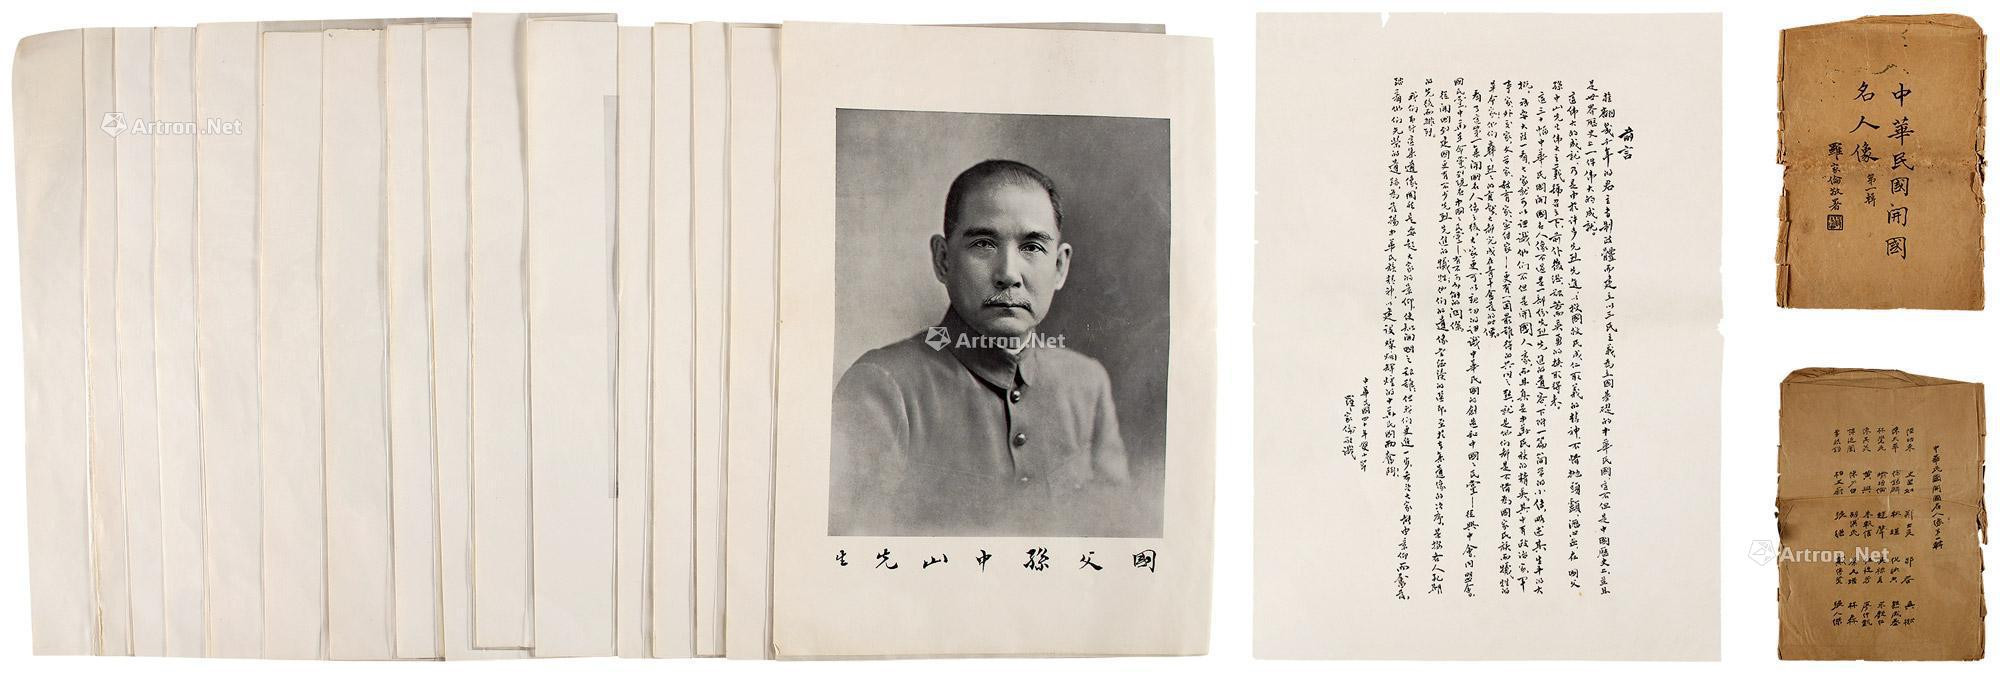 One volume of the Republic of China founding celebrity bronze plate paper image， with original cover